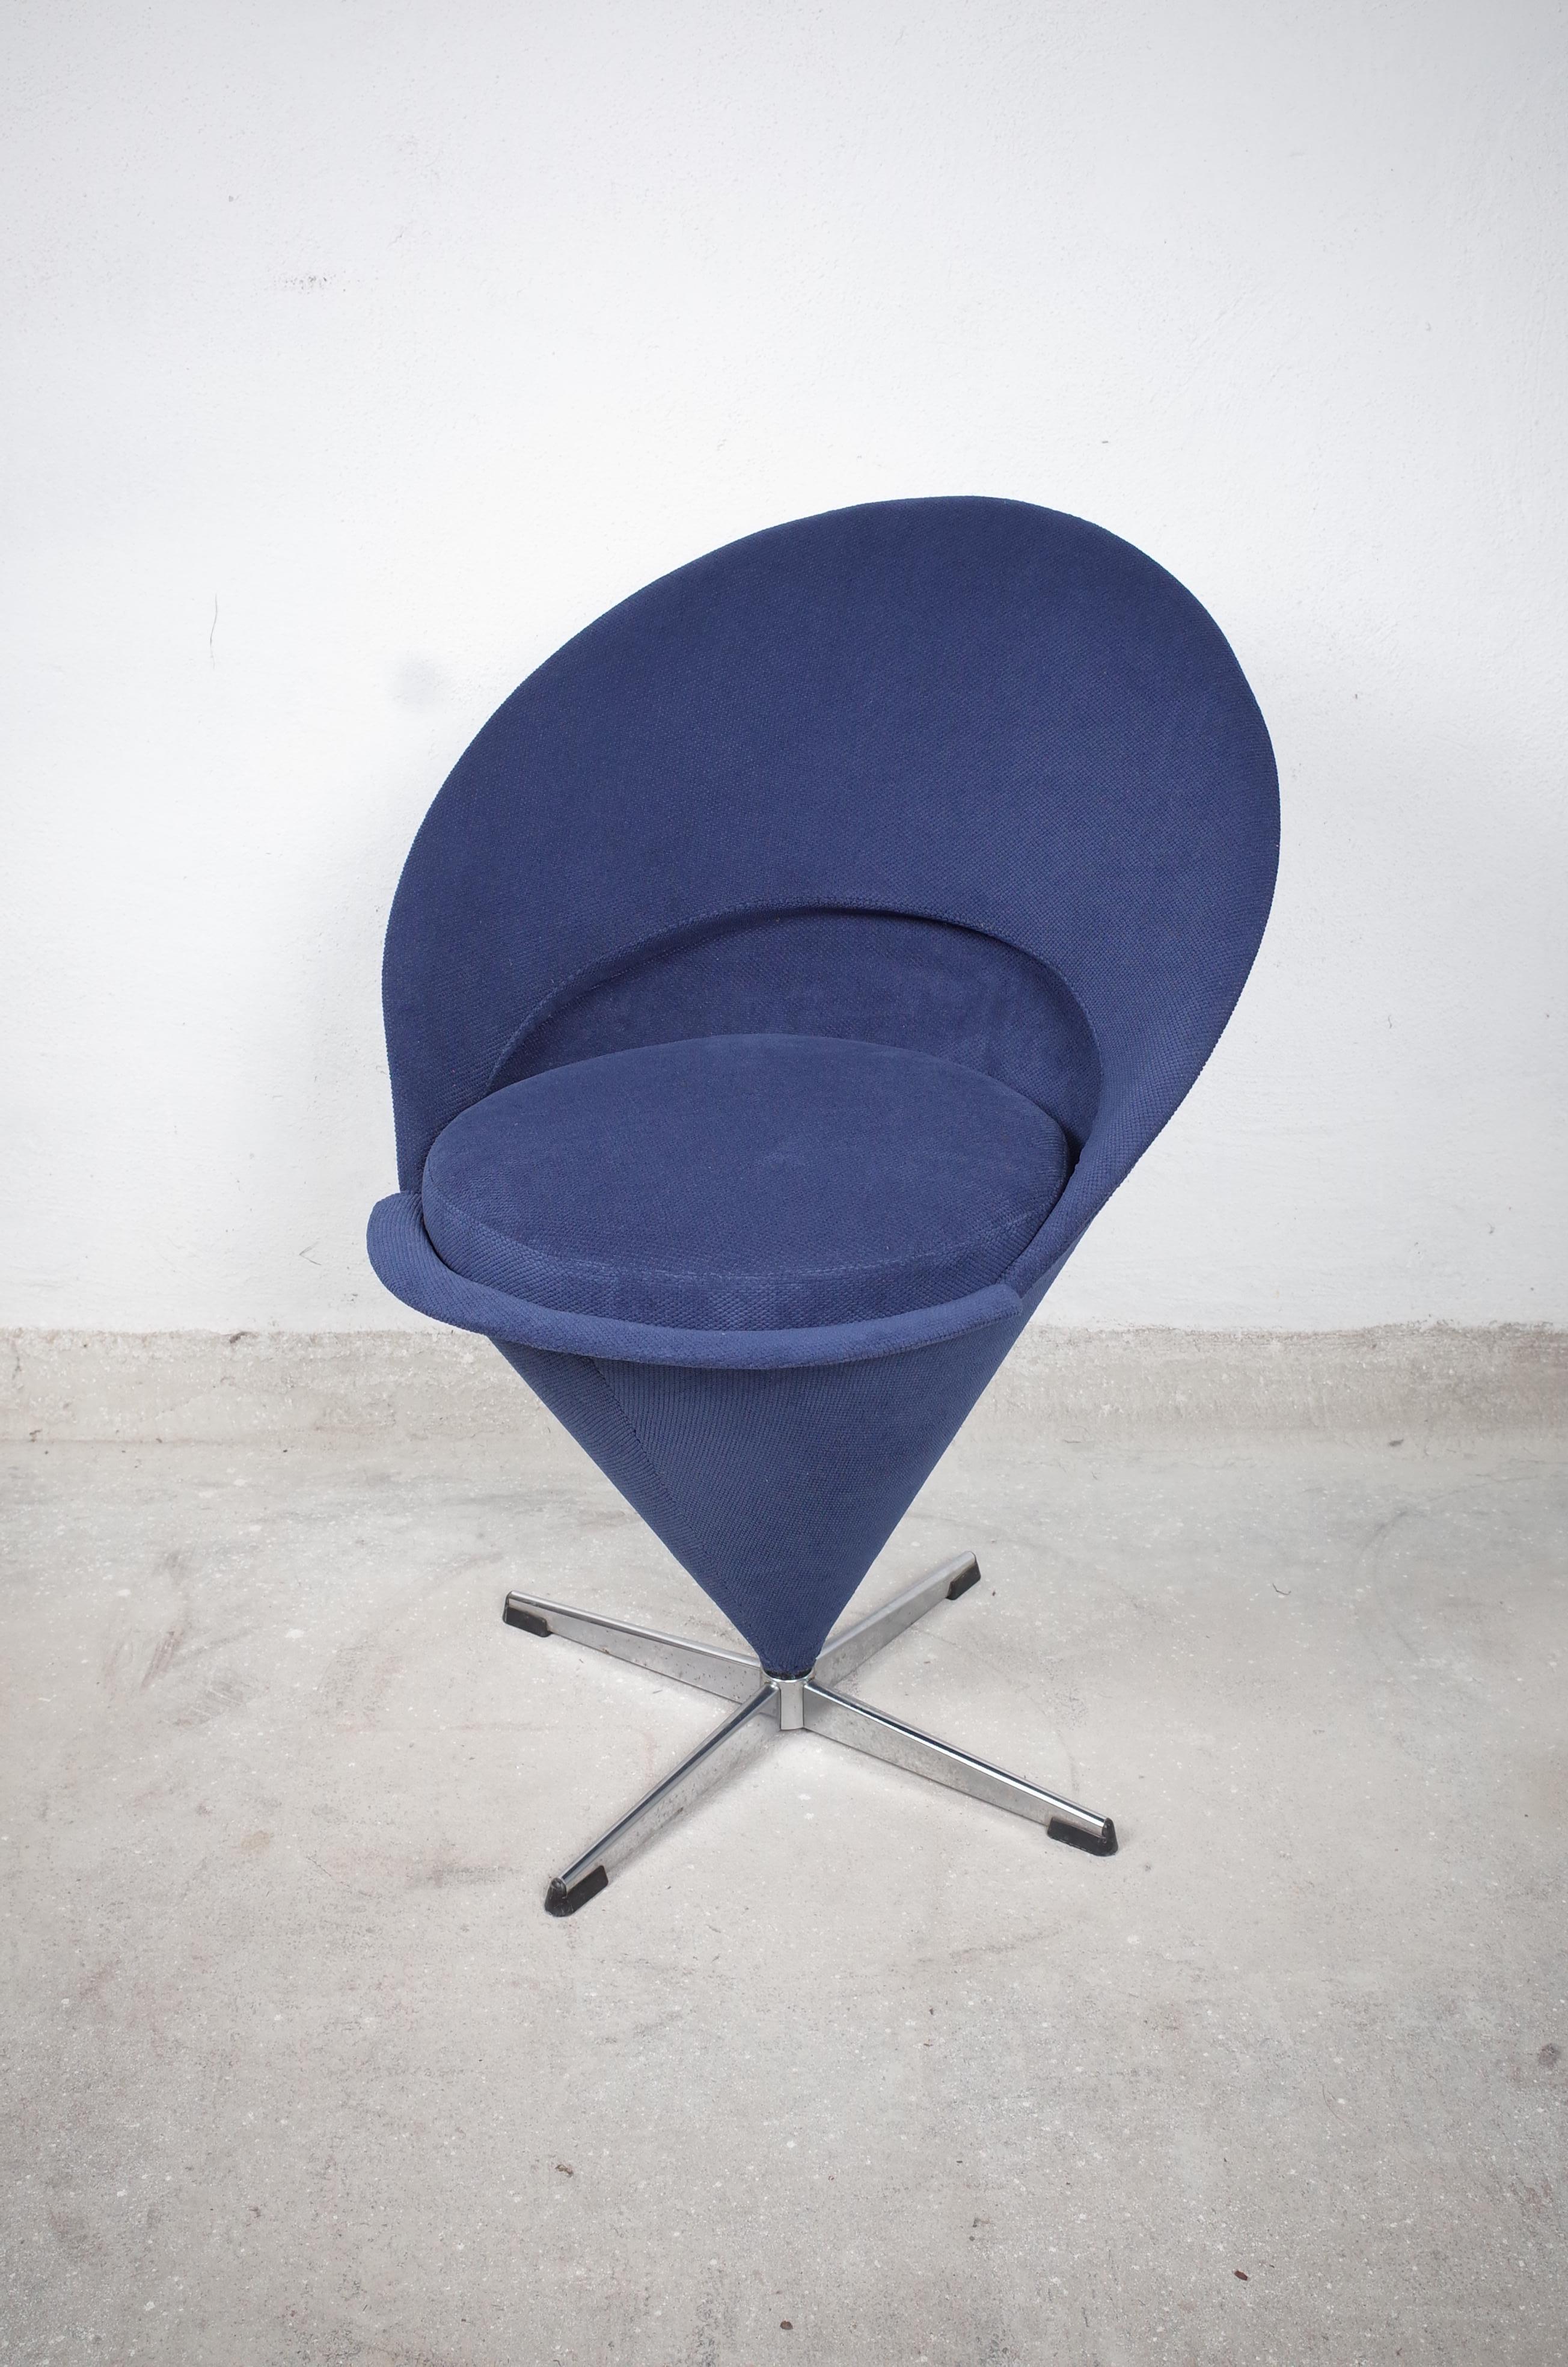 Midcentury Blue Cone Chair by Verner Panton, 1960s For Sale 4